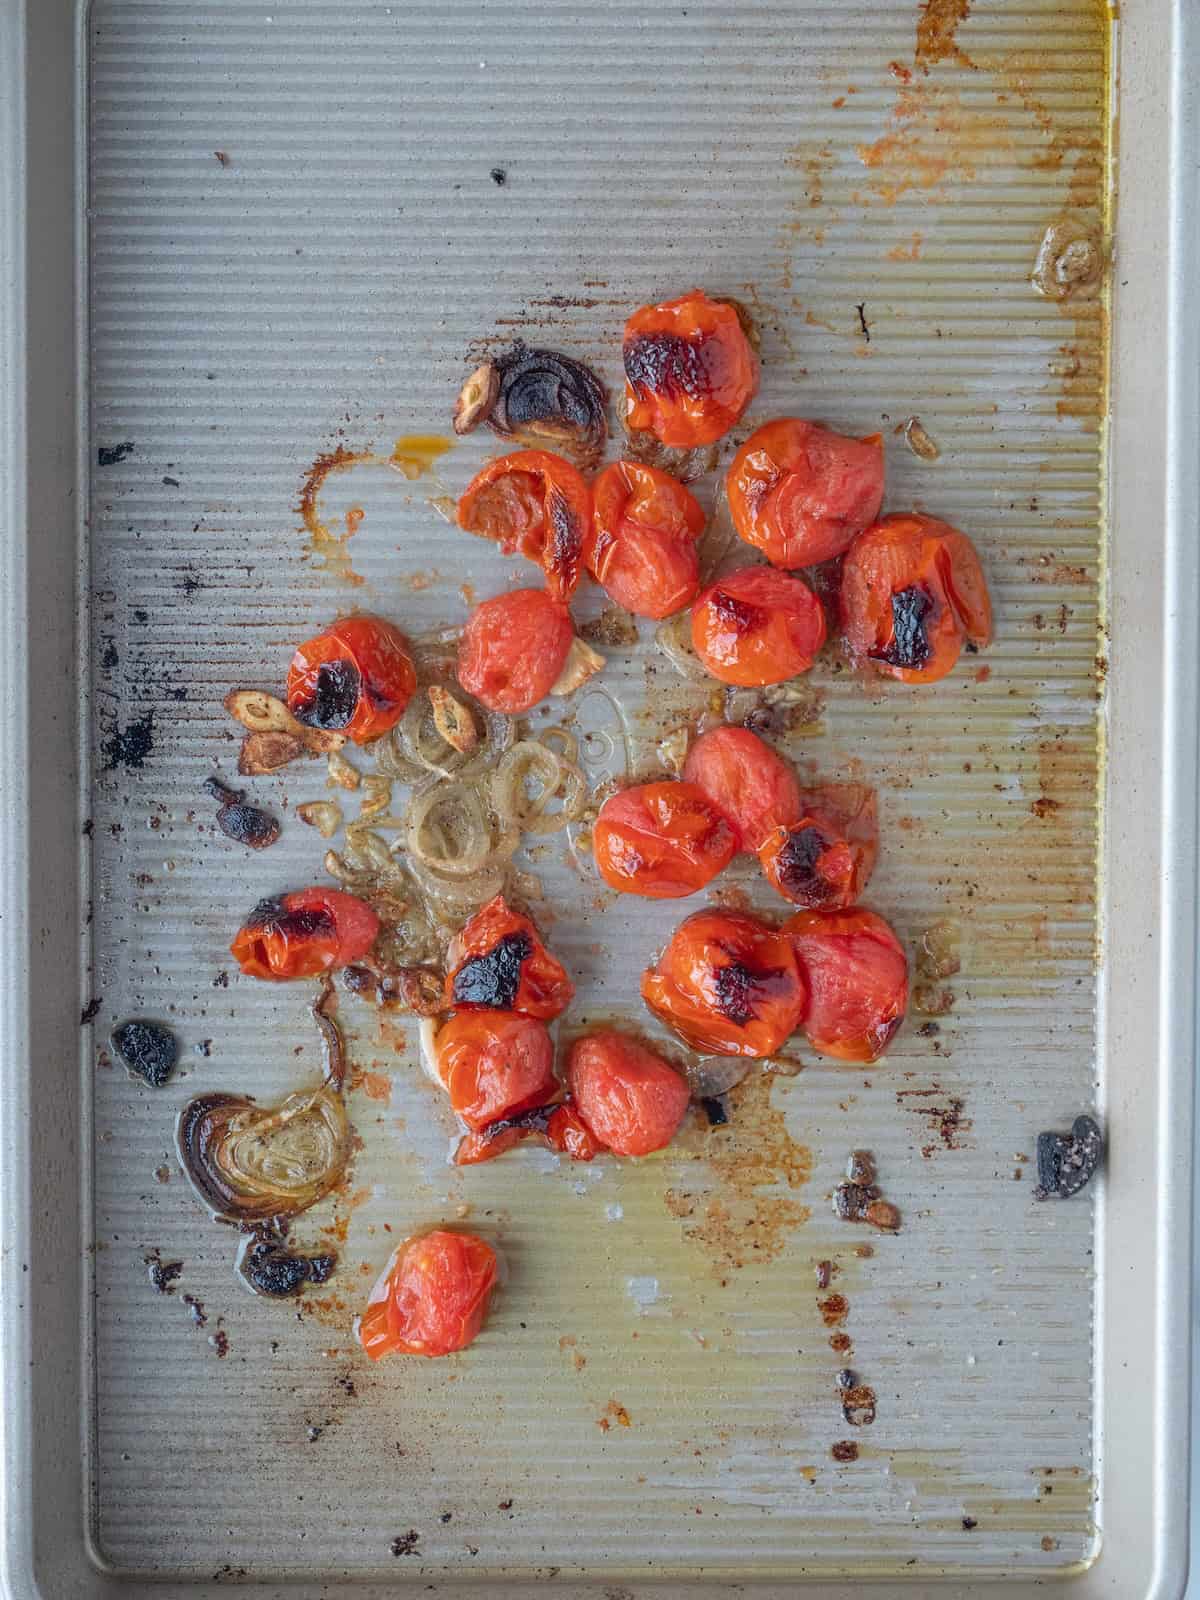 A baking sheet with charred cherry tomatoes and shallots.